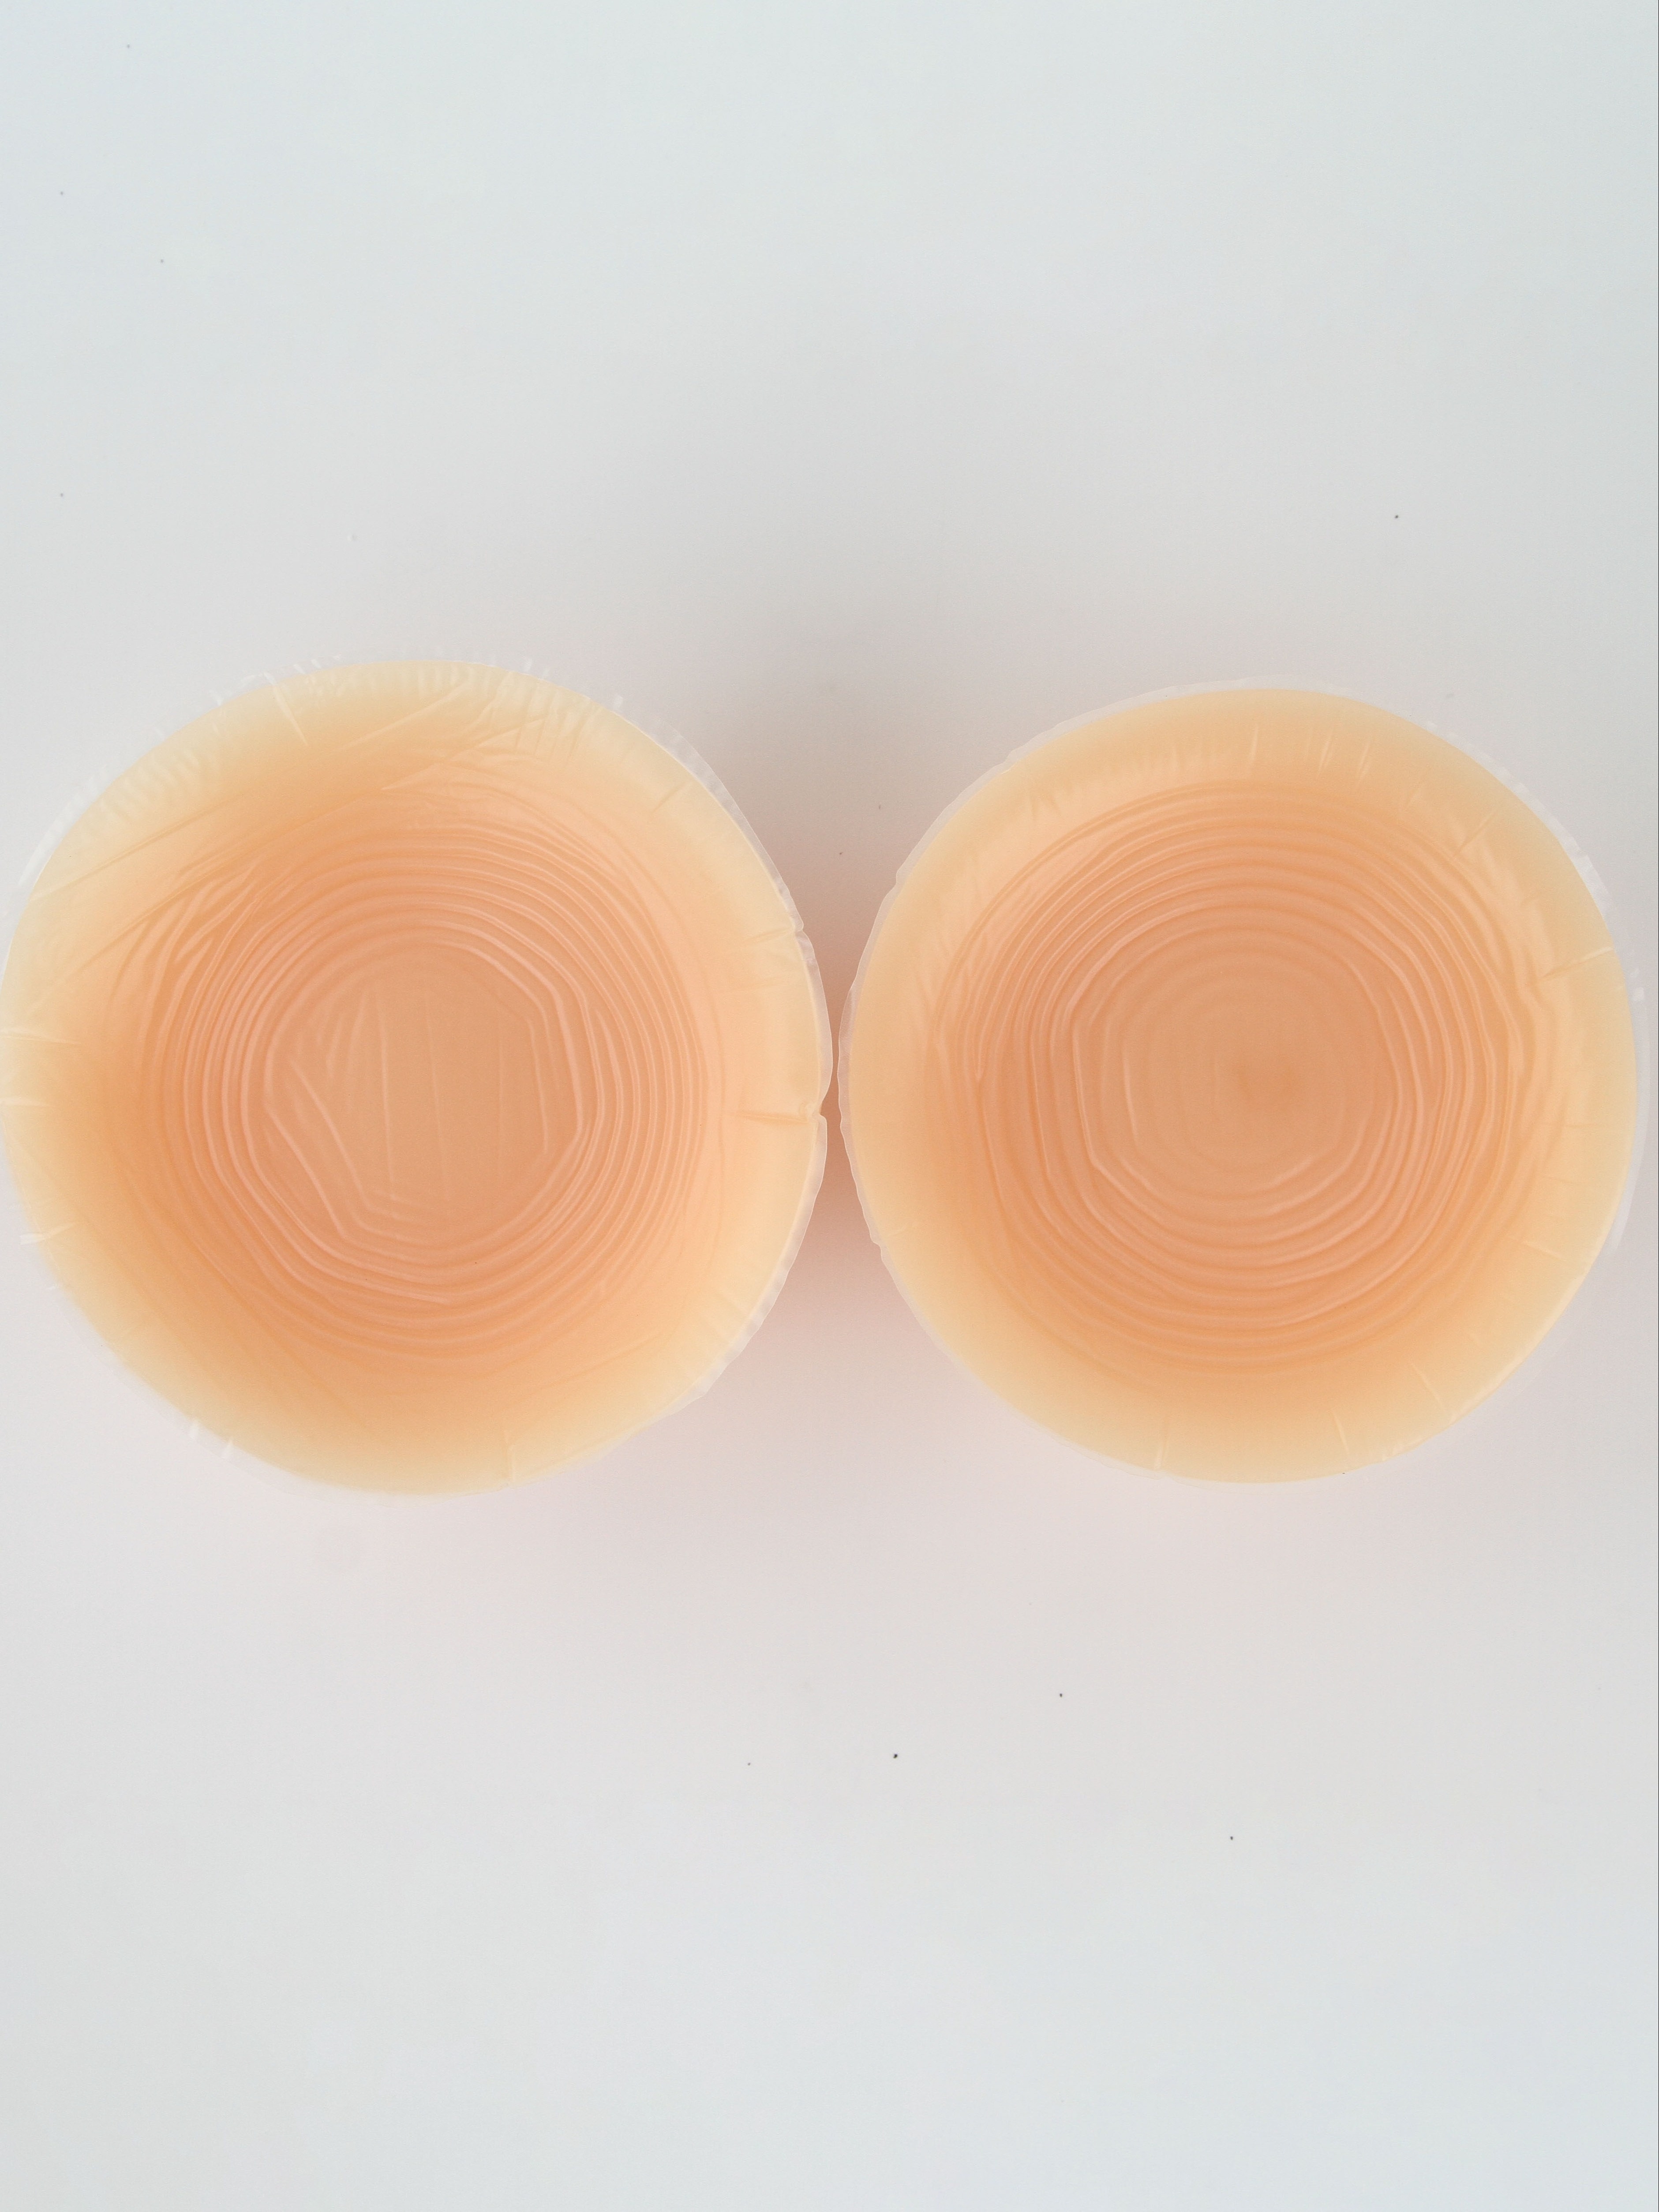 Huge Silicone Crossdressing Self-Adhesive Boobs Artificial